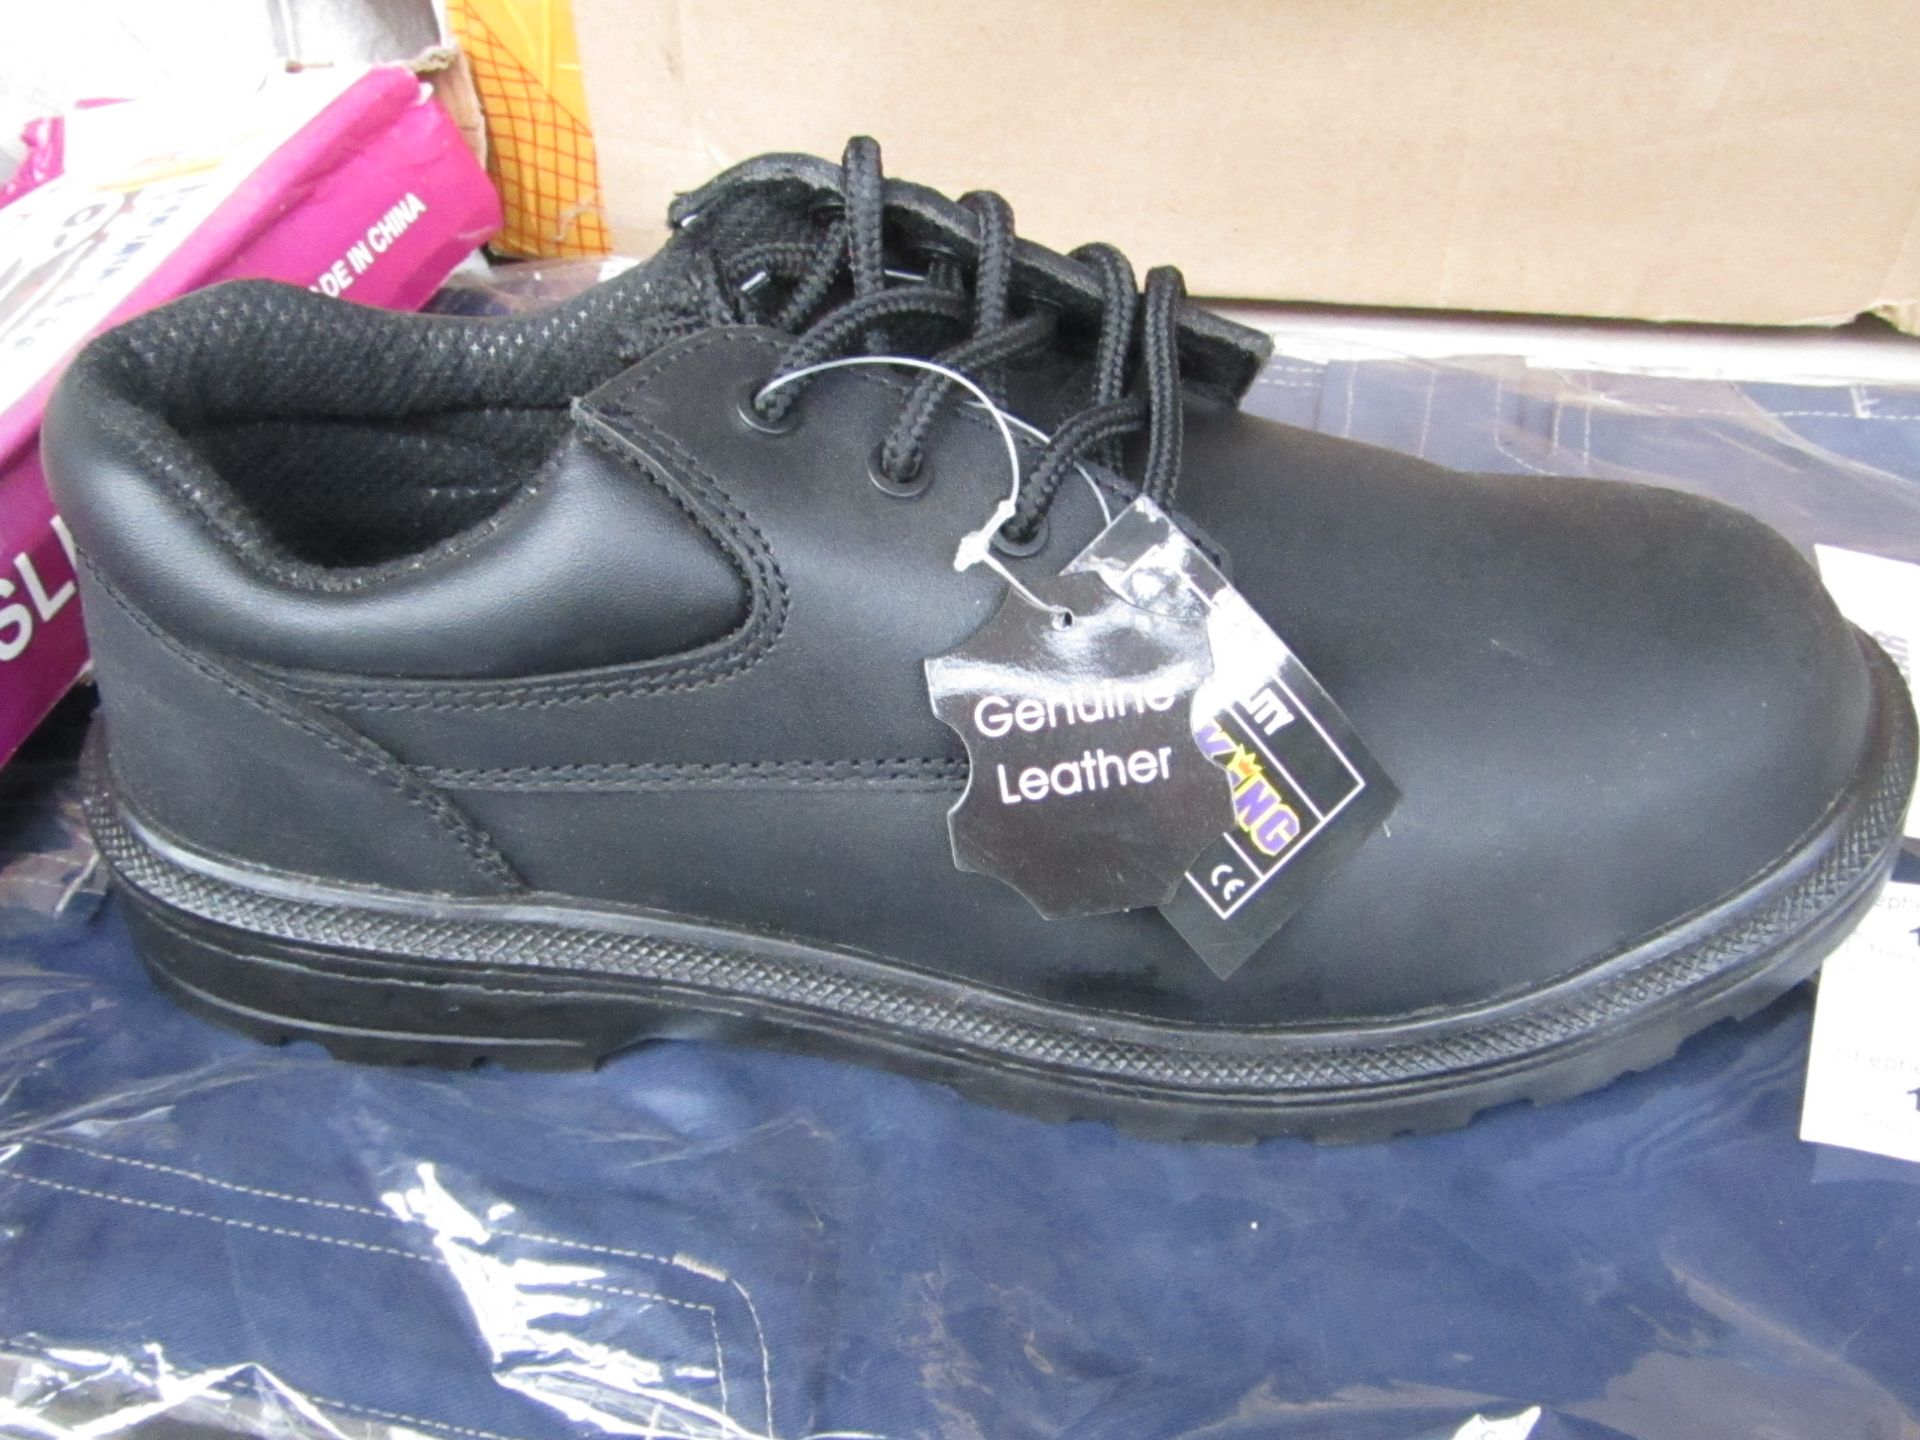 tuffking safety footwear size 8 new and boxed